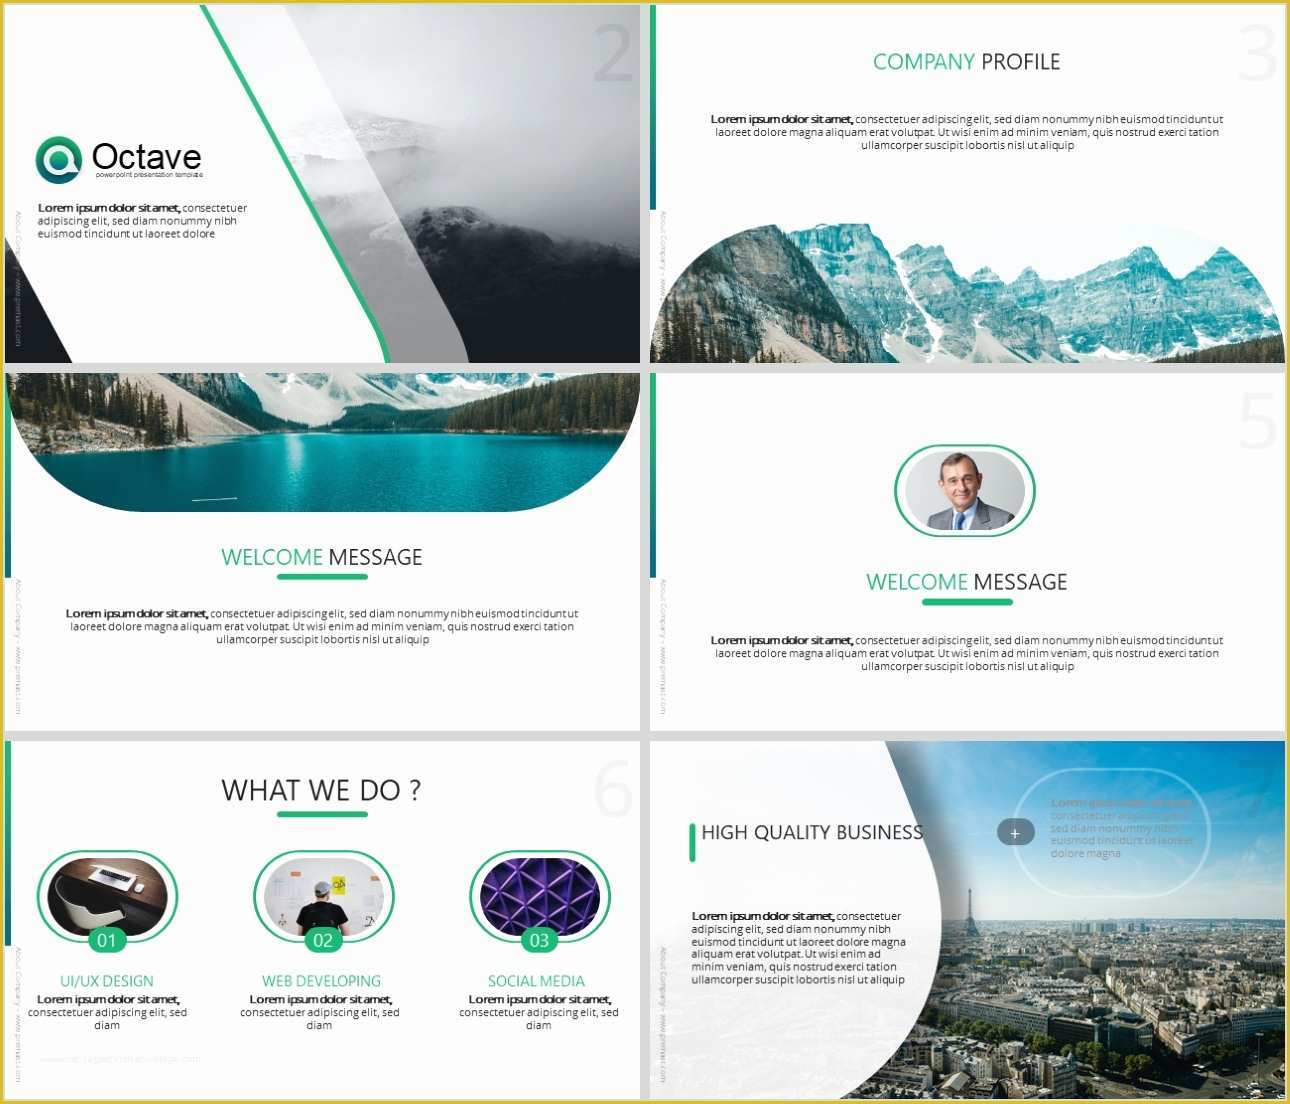 Free Powerpoint Presentation Templates Of Octave Free Powerpoint Presentation Template Just Free